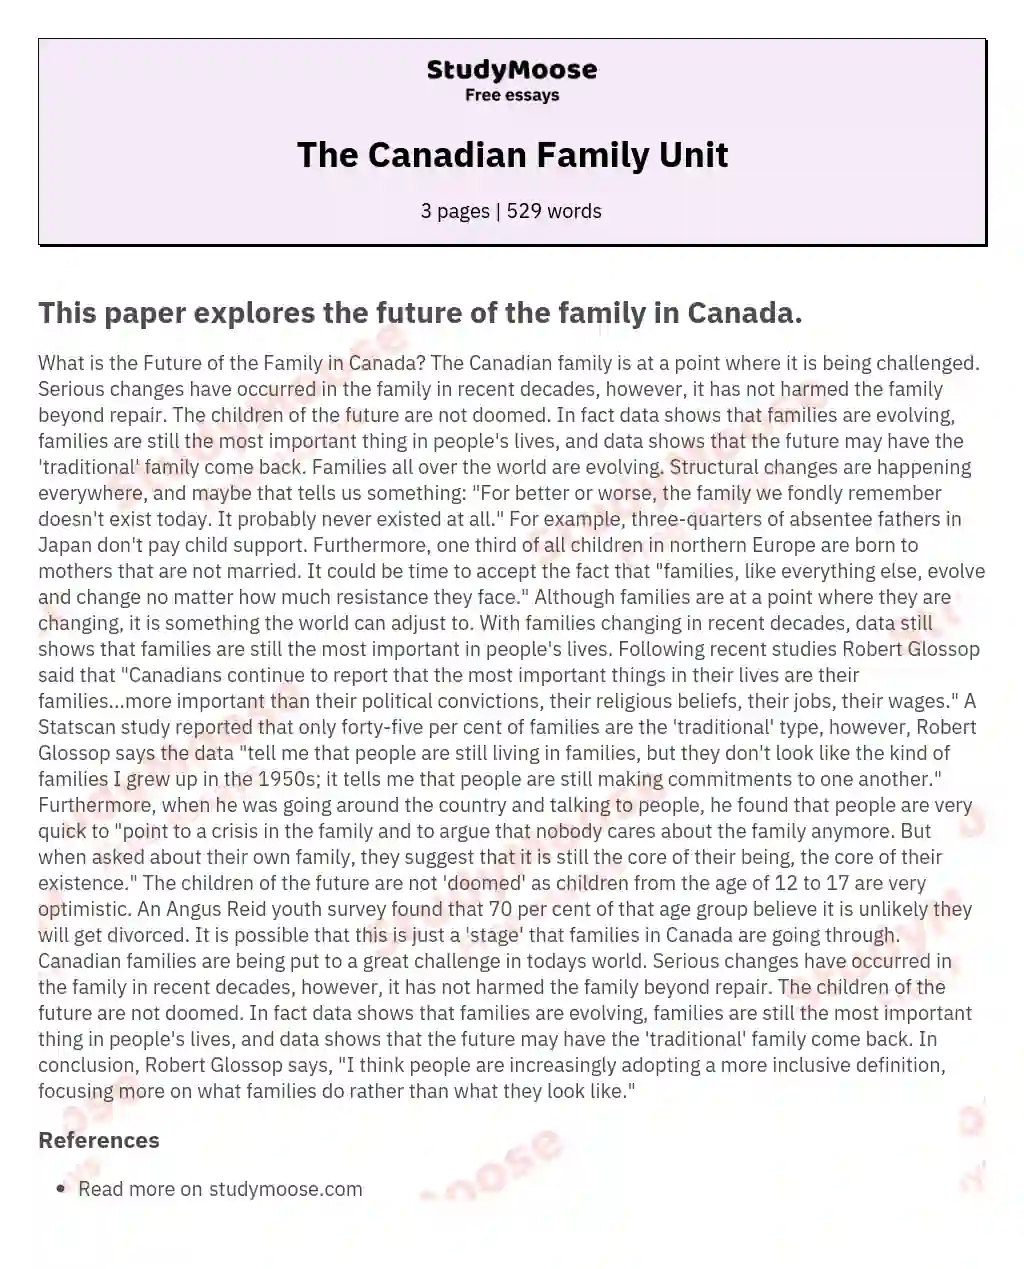 The Canadian Family Unit essay